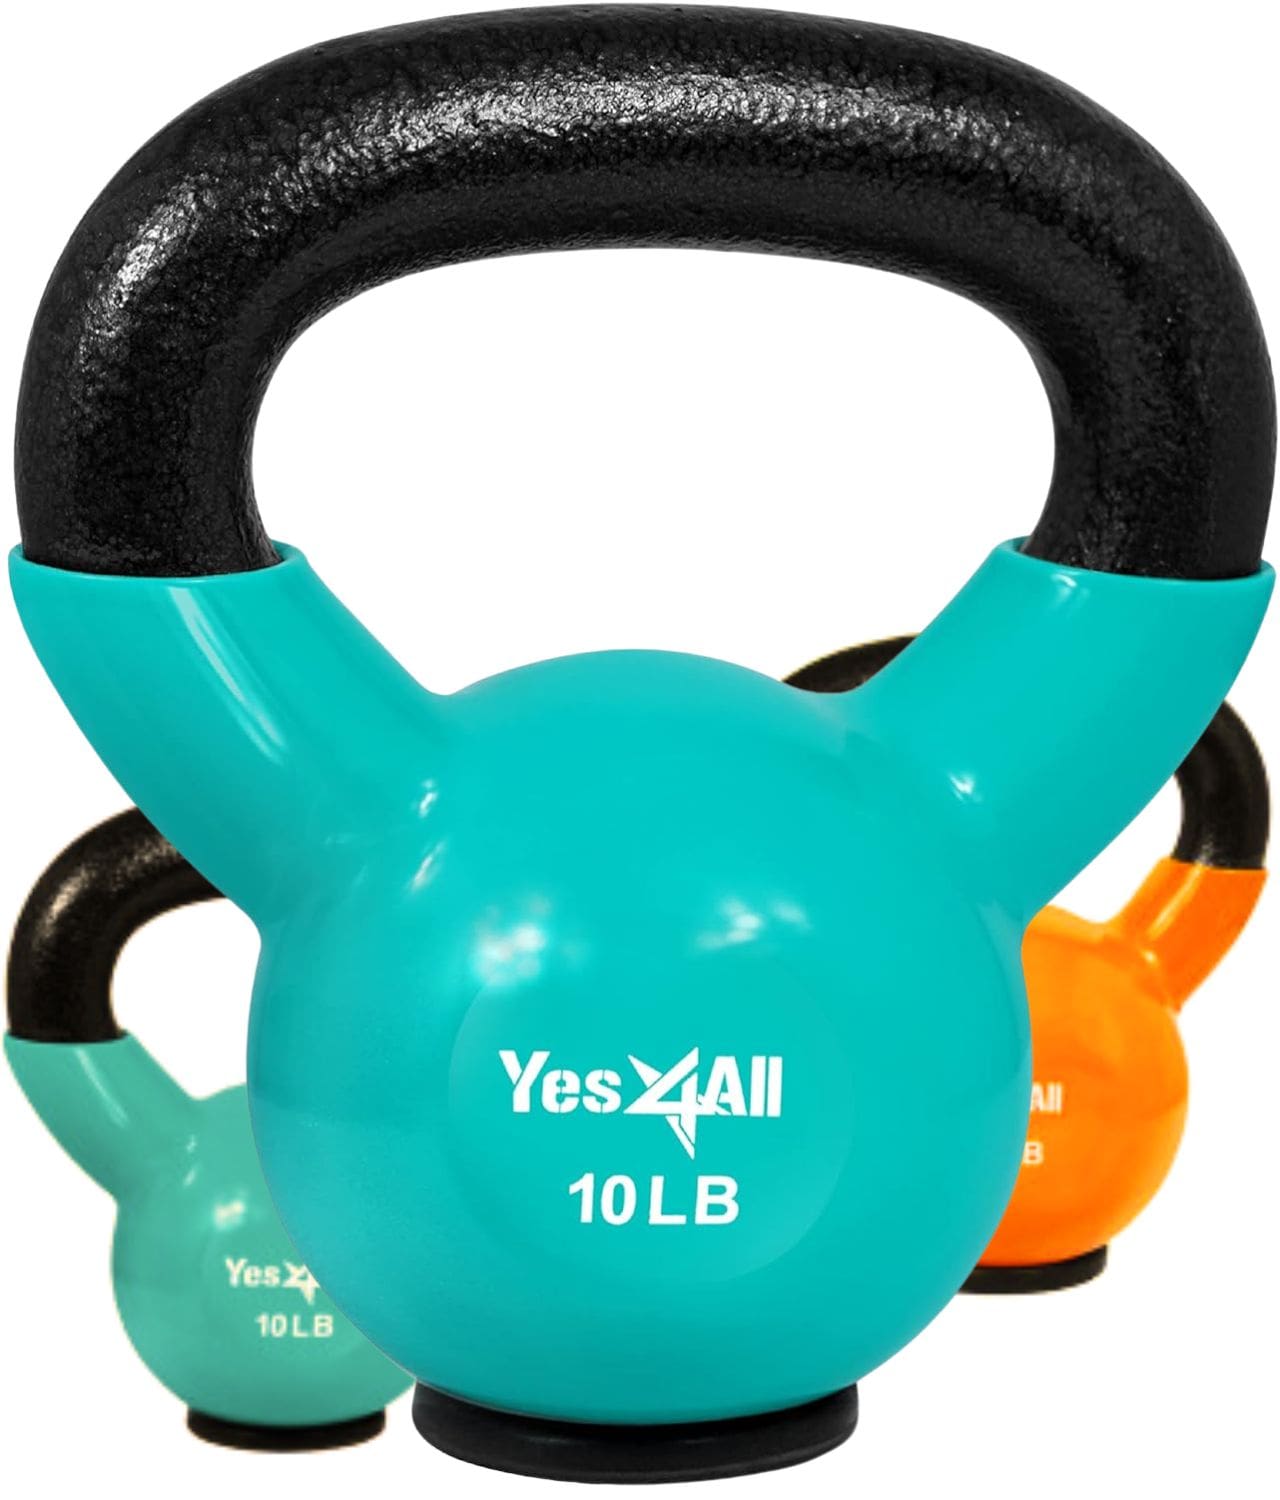 Exercise Equipment : Vinyl Coated Cast Iron Kettlebell for Home Workout | Strength Training Exercise Equipment, 5-40 lb, 9 Colors